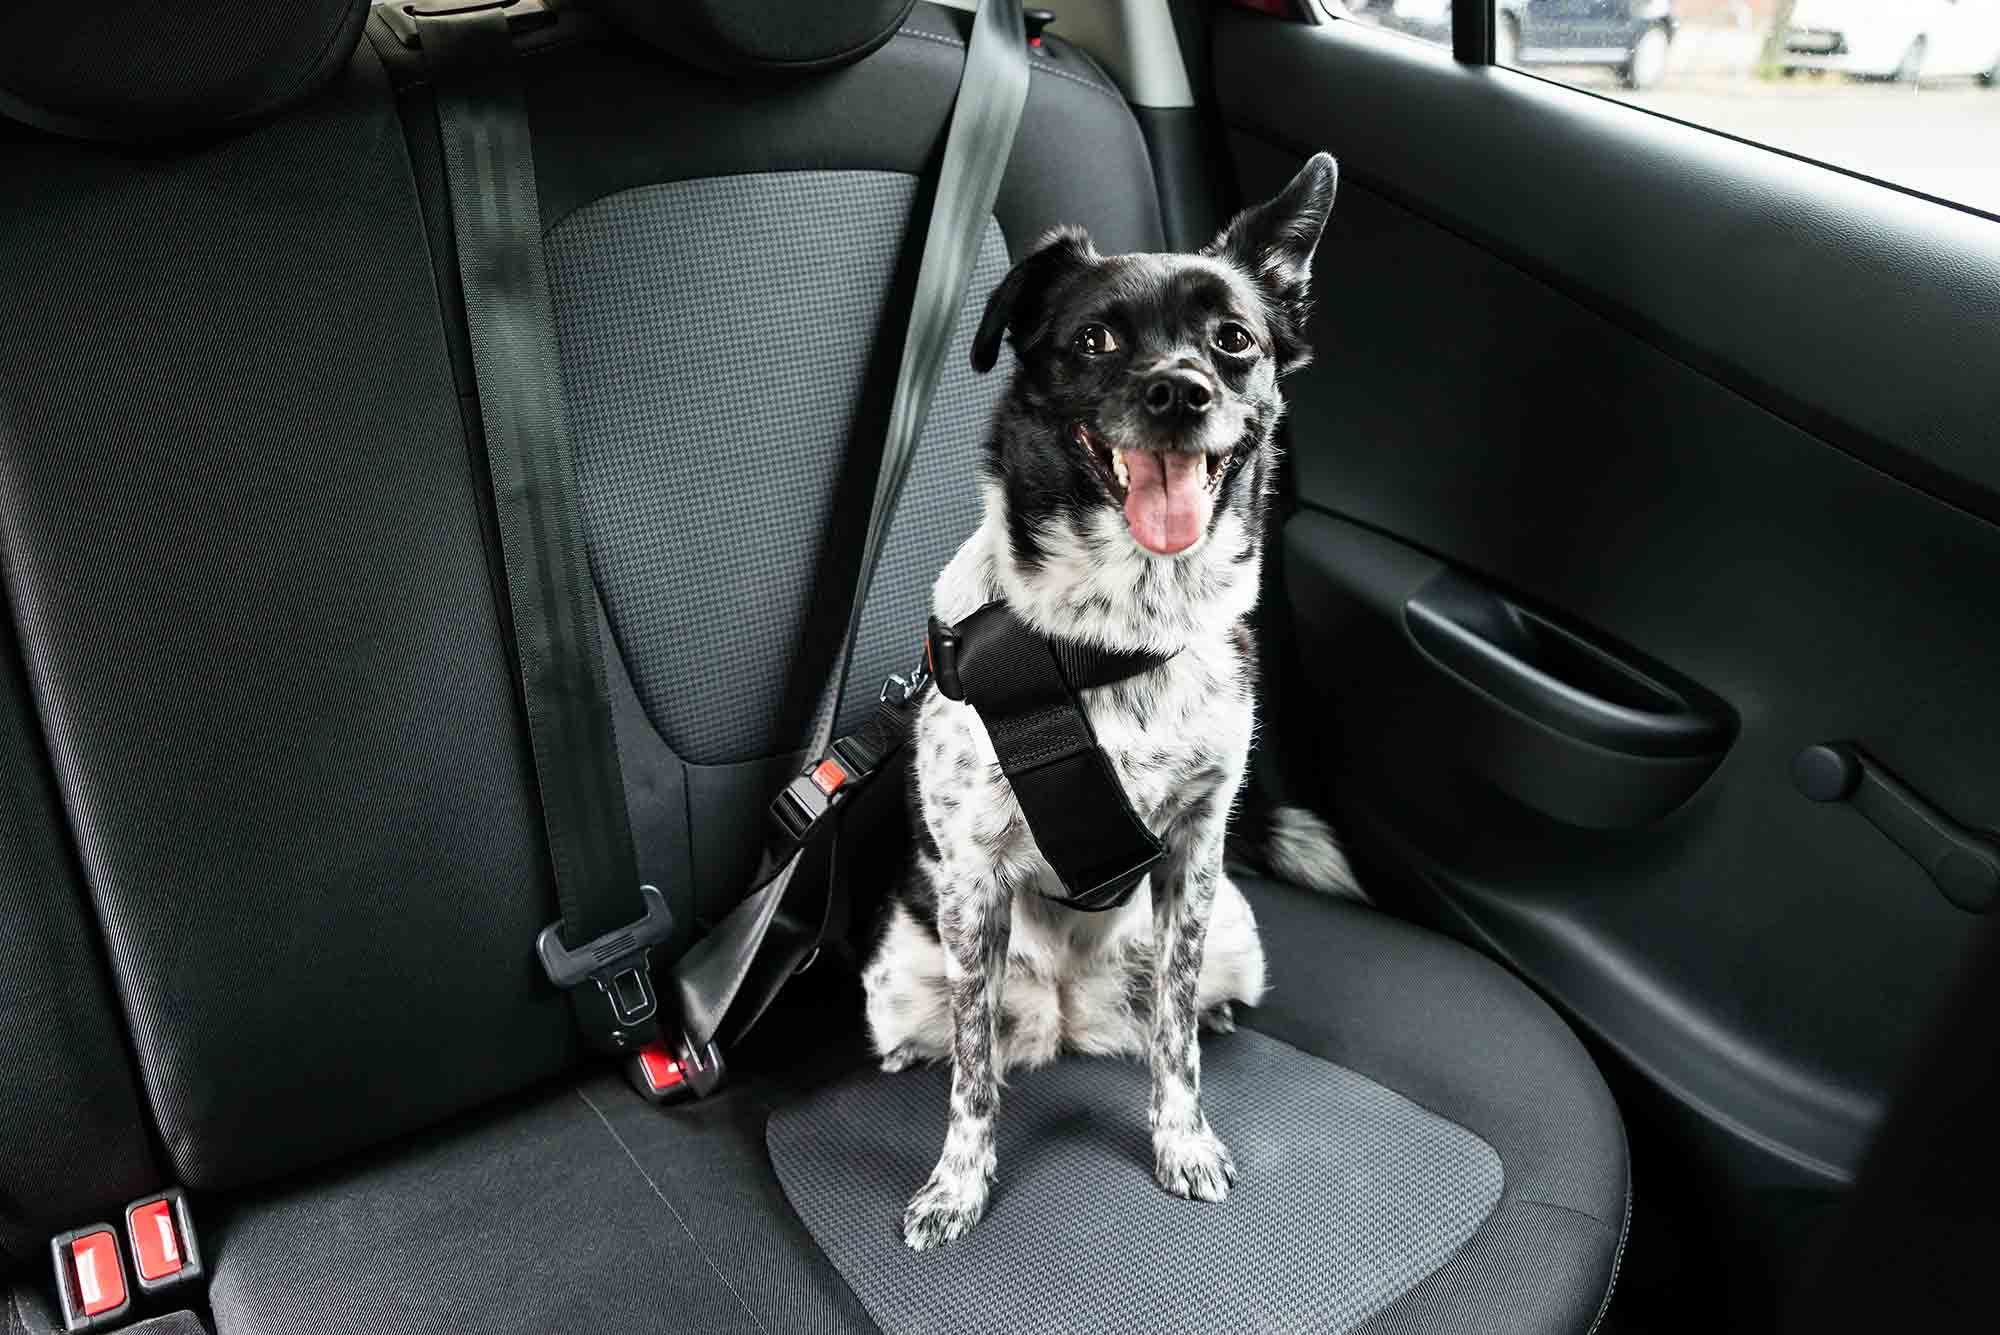 A medium white and black dog sitting contently in the back sear of a car, wearing a doggy seatbelt, one ear up, happy to go for a ride.